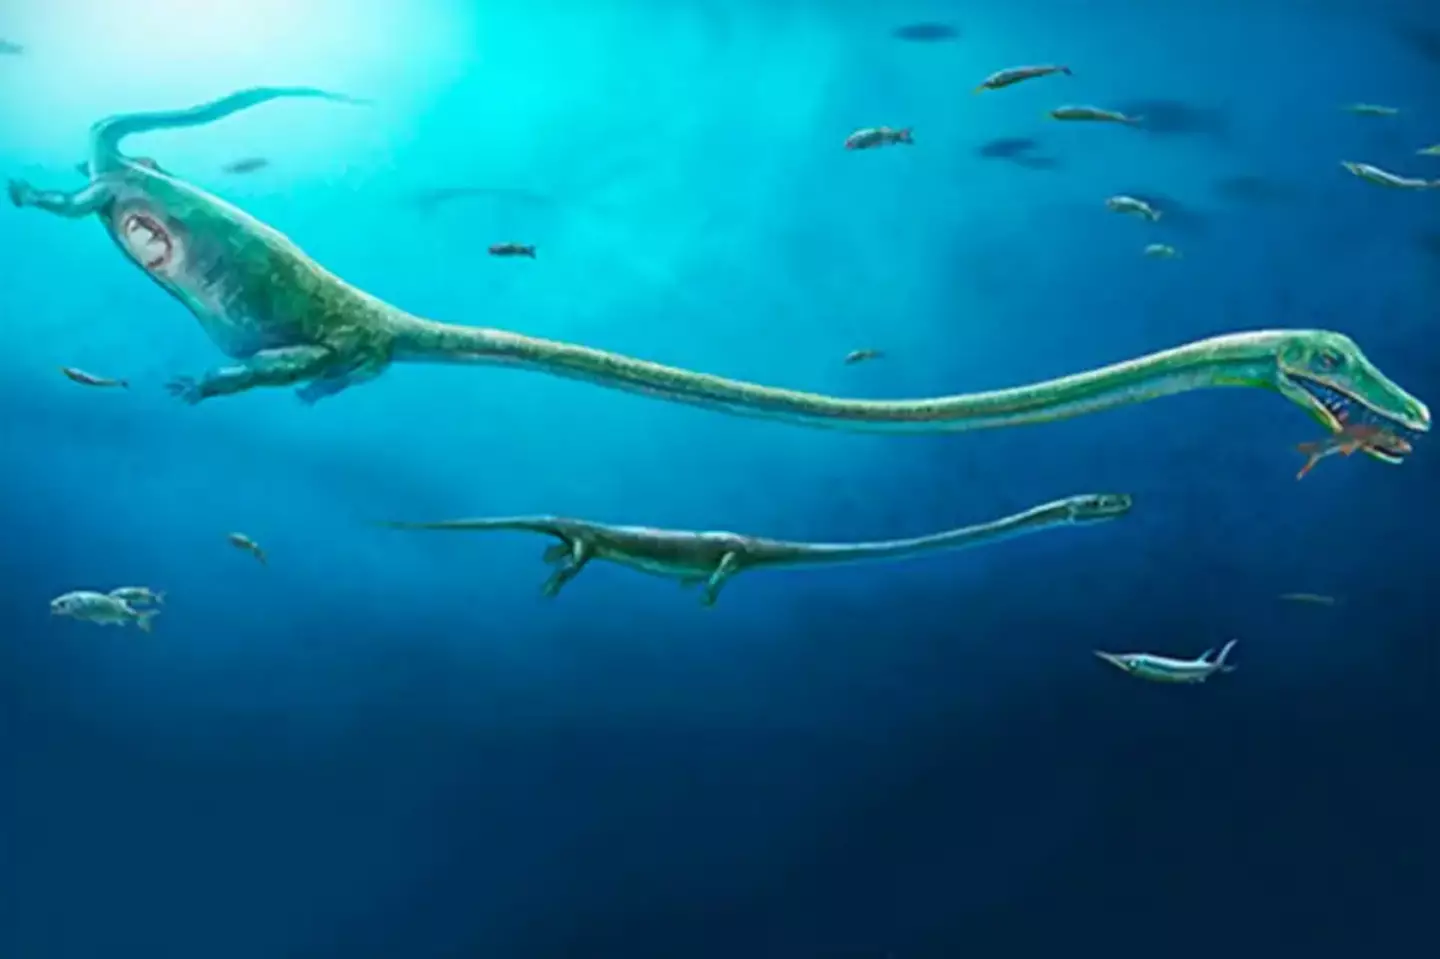 It has been dubbed the 'dragon' due to its long neck and tail.